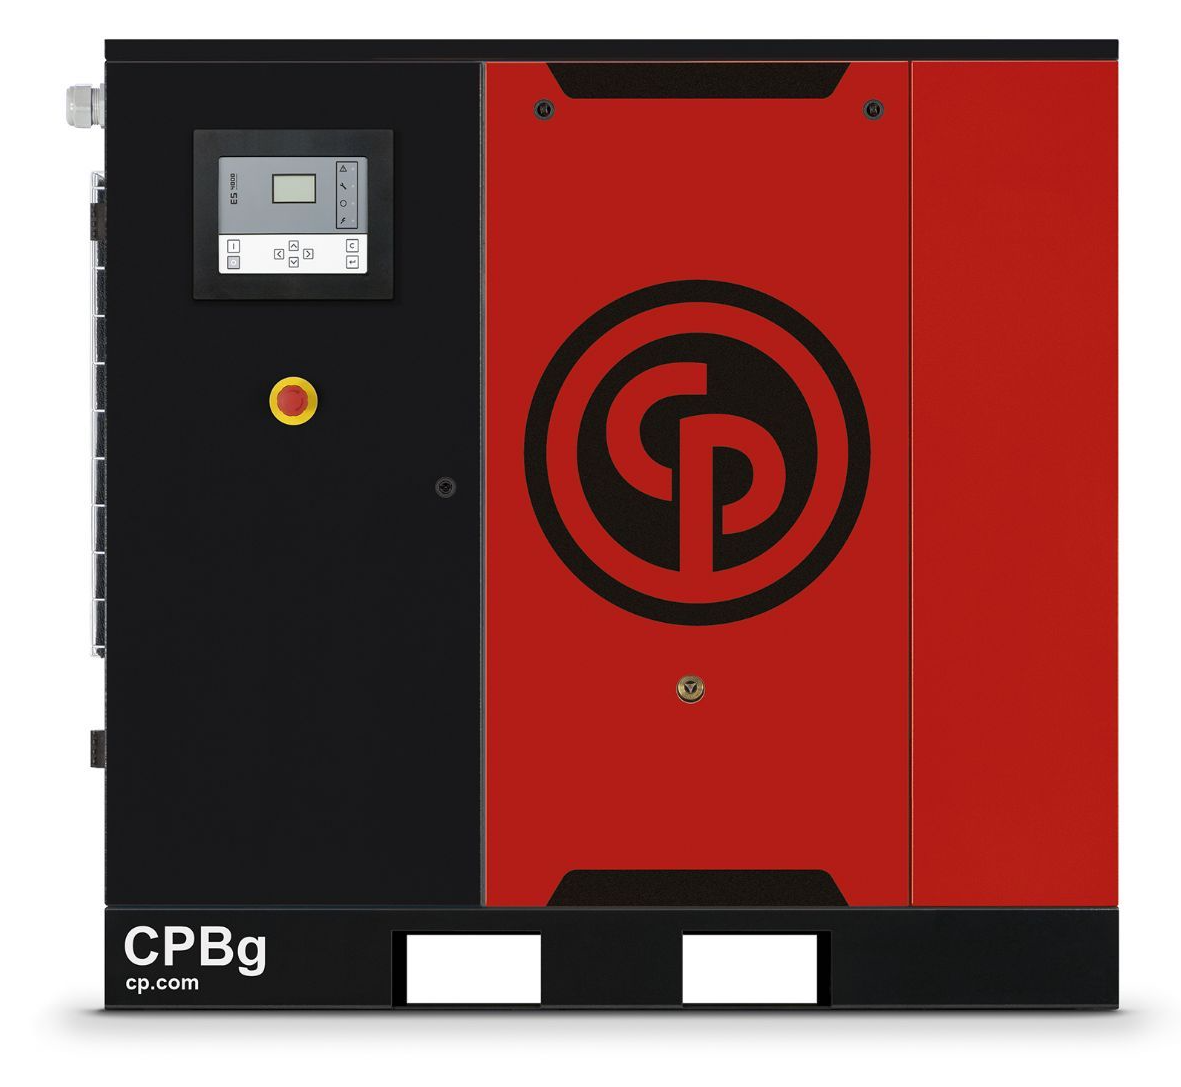 Chicago Pneumatic CPBg 35 HP Base Mount Rotary Screw Air Compressor | 140.6 CFM@150 PSI, 208-230/460 volt, 3 Phase | 4152017614